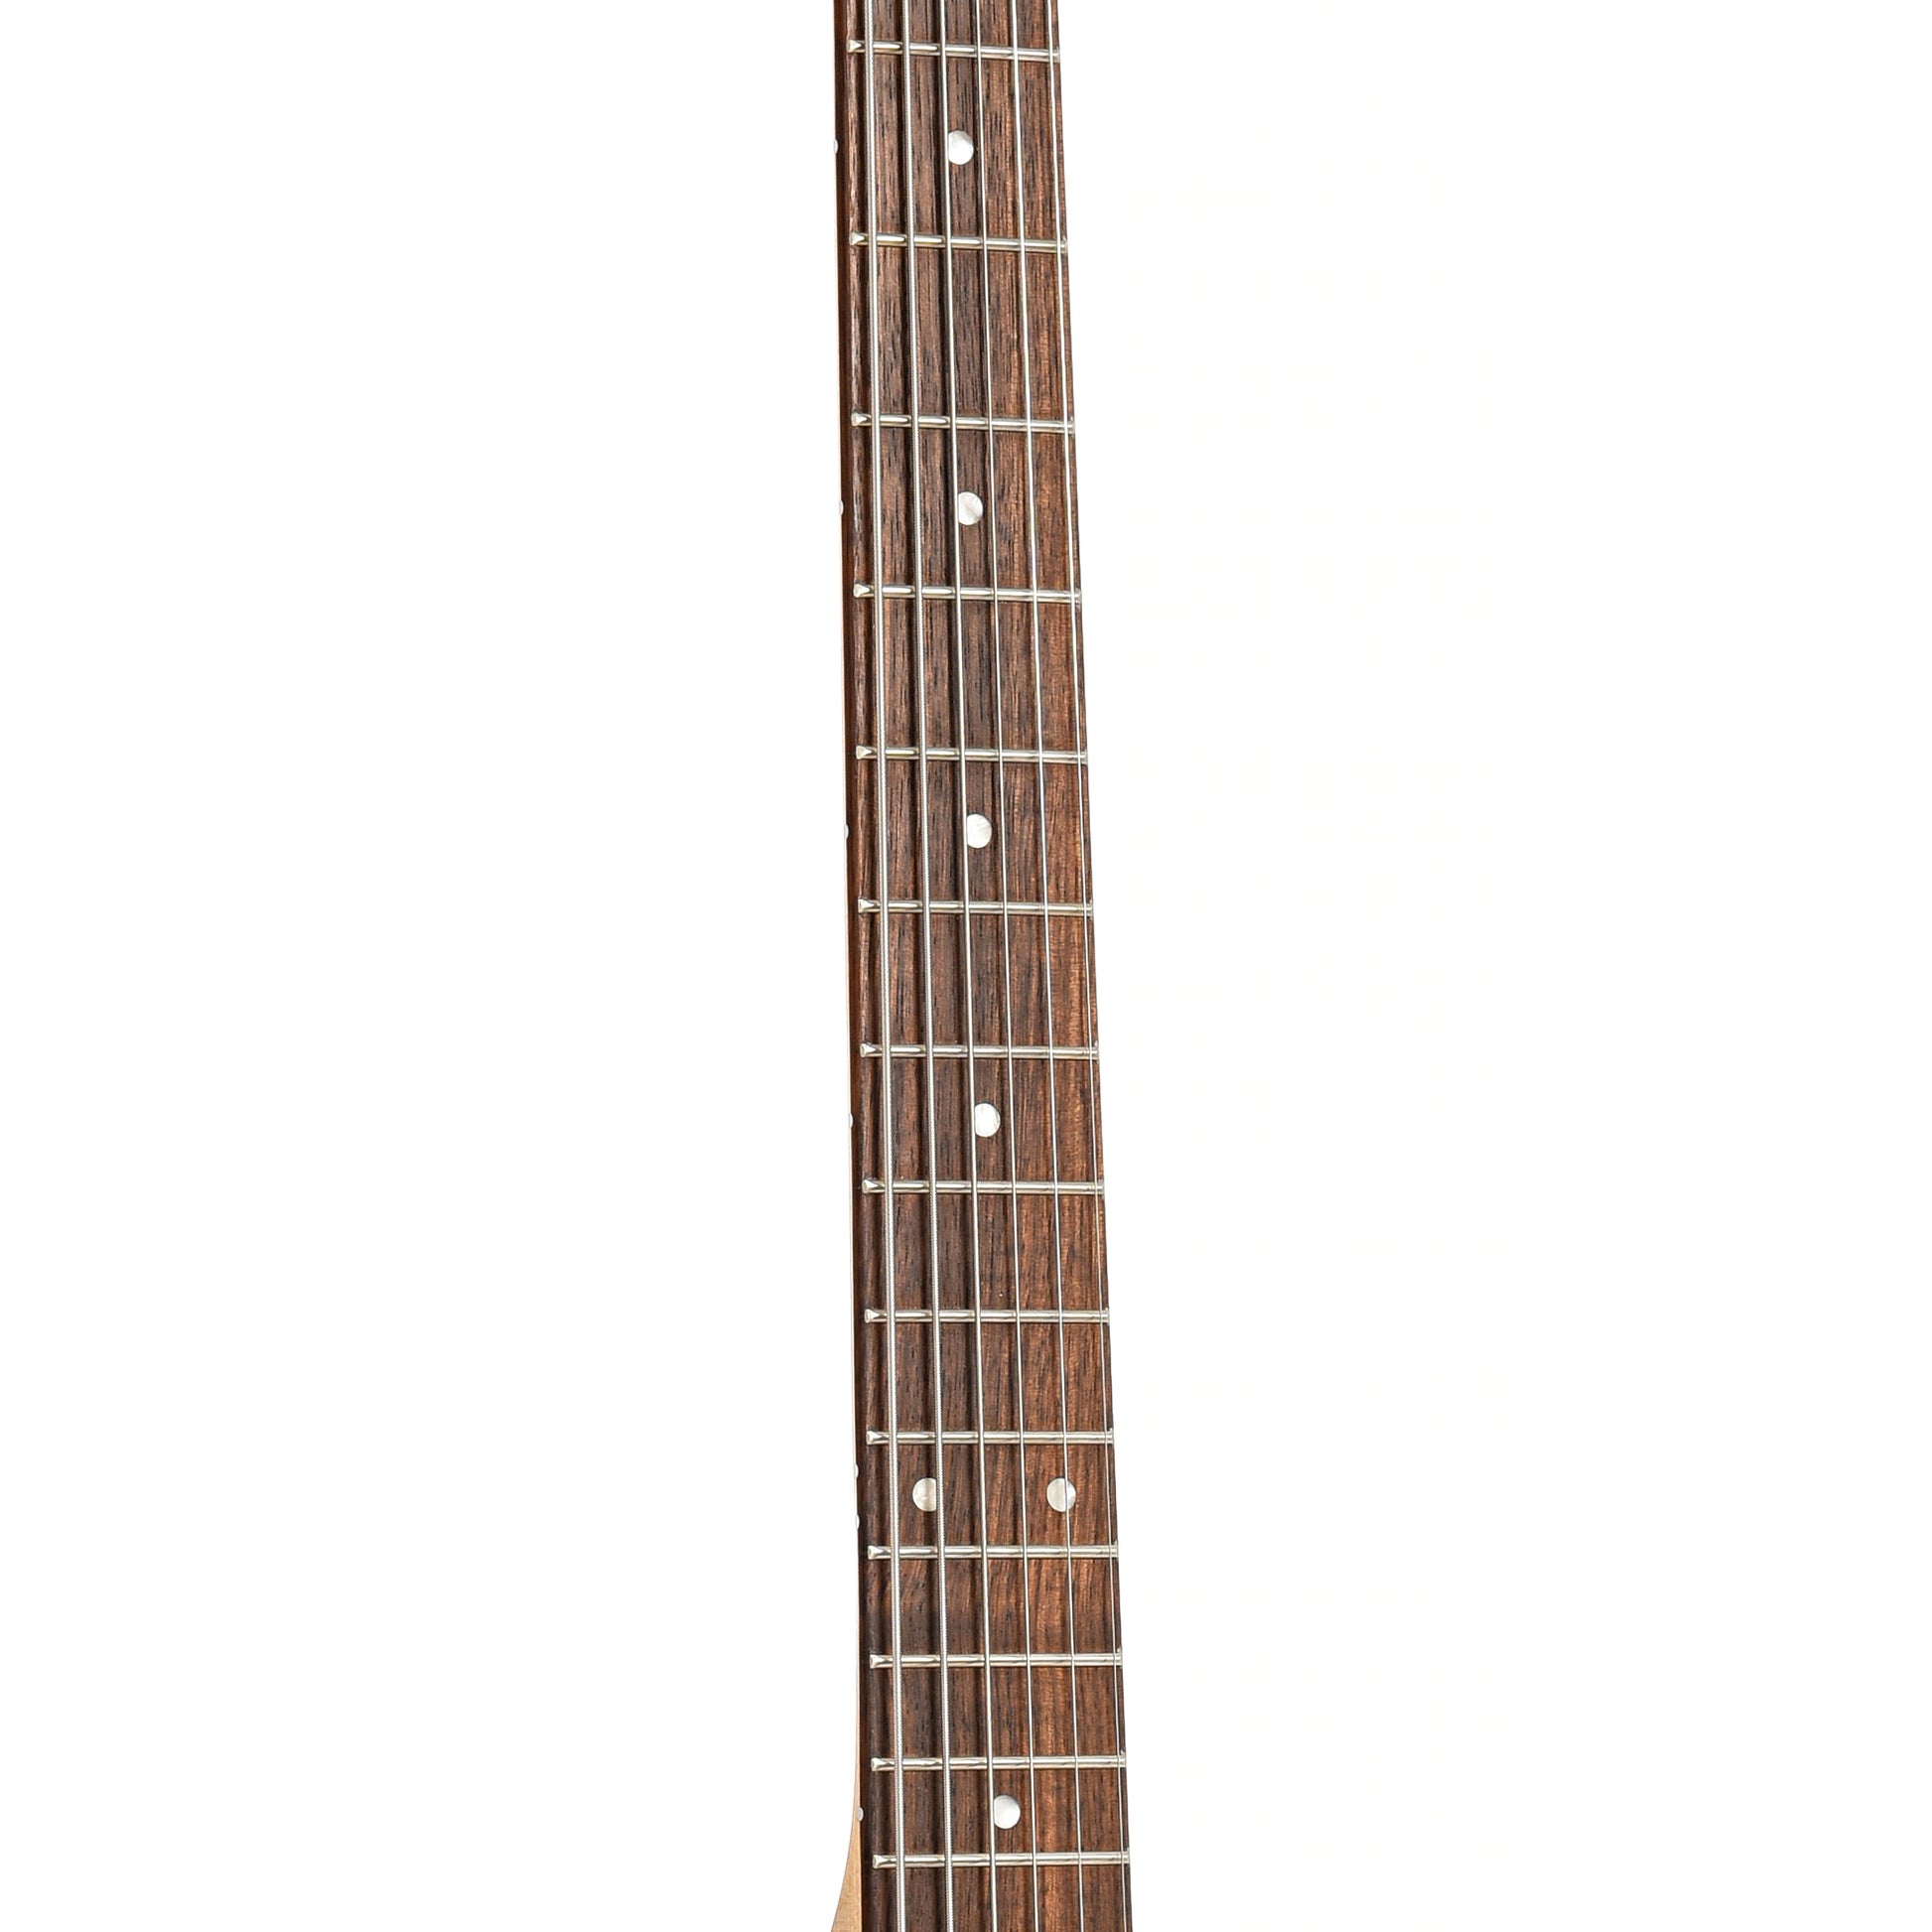 Image 6 of Squier Paranormal Baritone Cabronita Telecaster, 3-Color Sunburst - SKU# SPBARICT-3TS : Product Type Other : Elderly Instruments